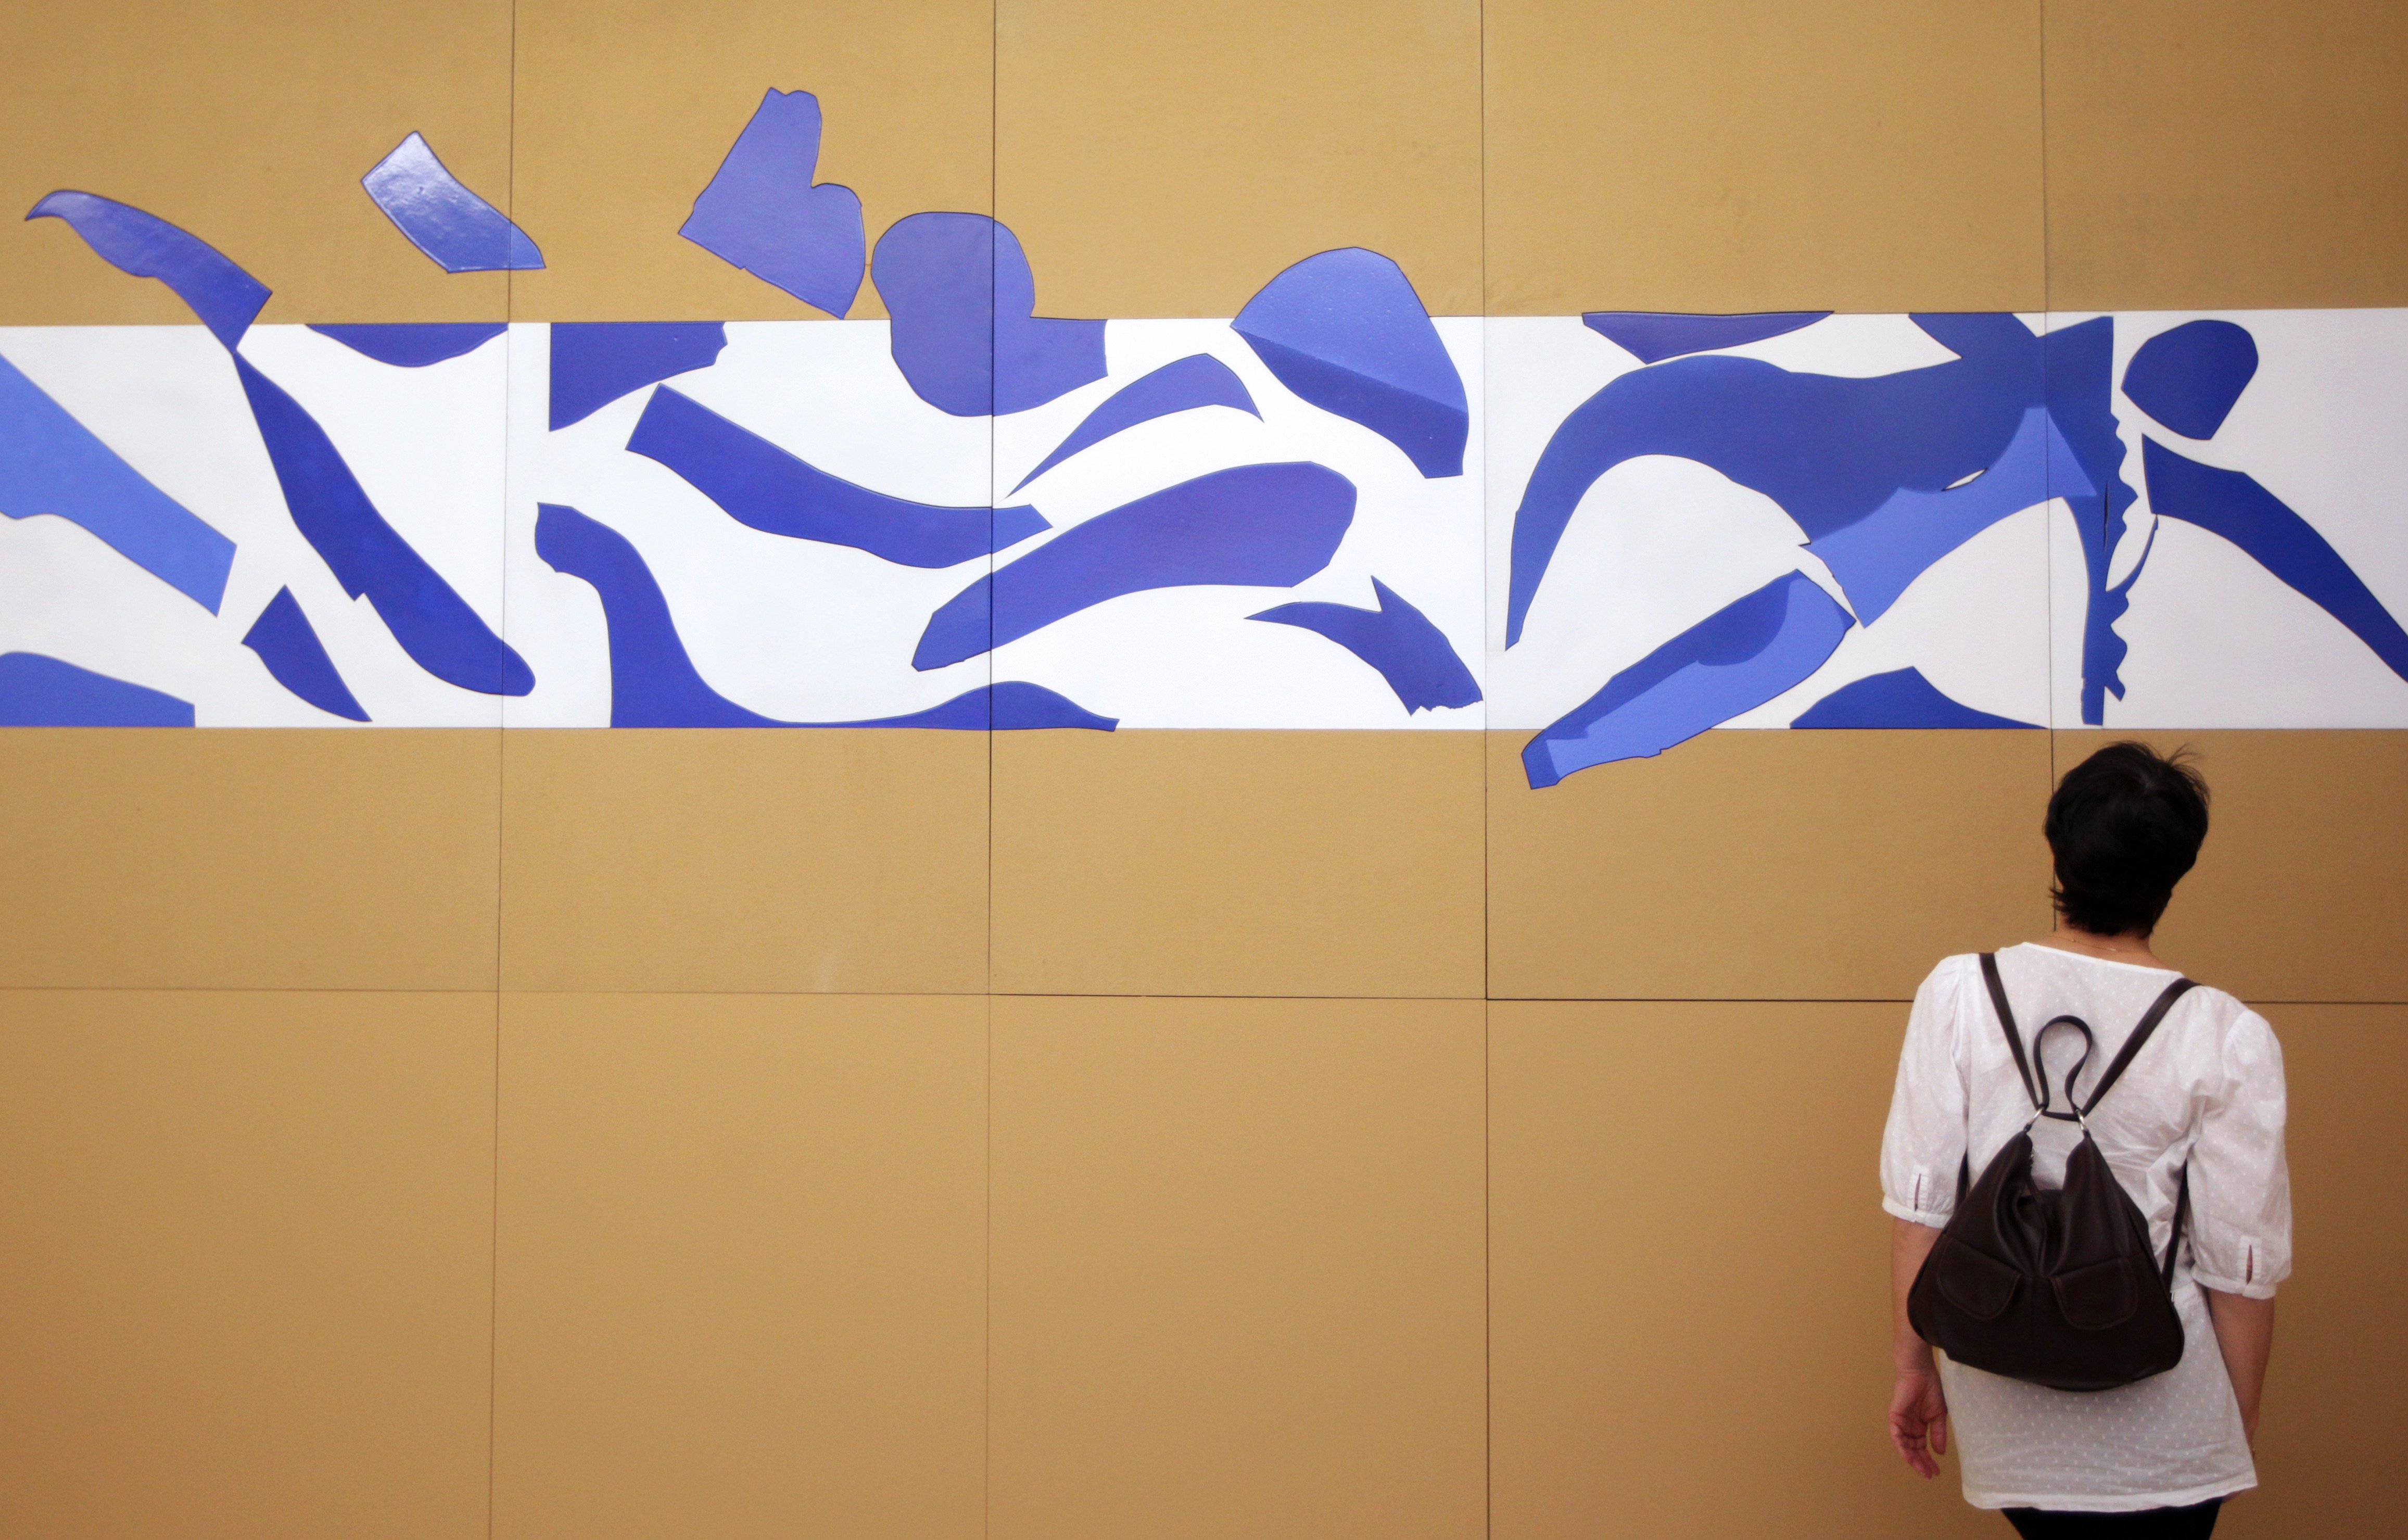 A visitor looks at the art work "La piscine" inspired by French artist Henri Matisse at the Matisse Museum on June 20, 2013 in Nice, southeastern France. Photo: JEAN CHRISTOPHE MAGNENET/AFP/Getty Images.